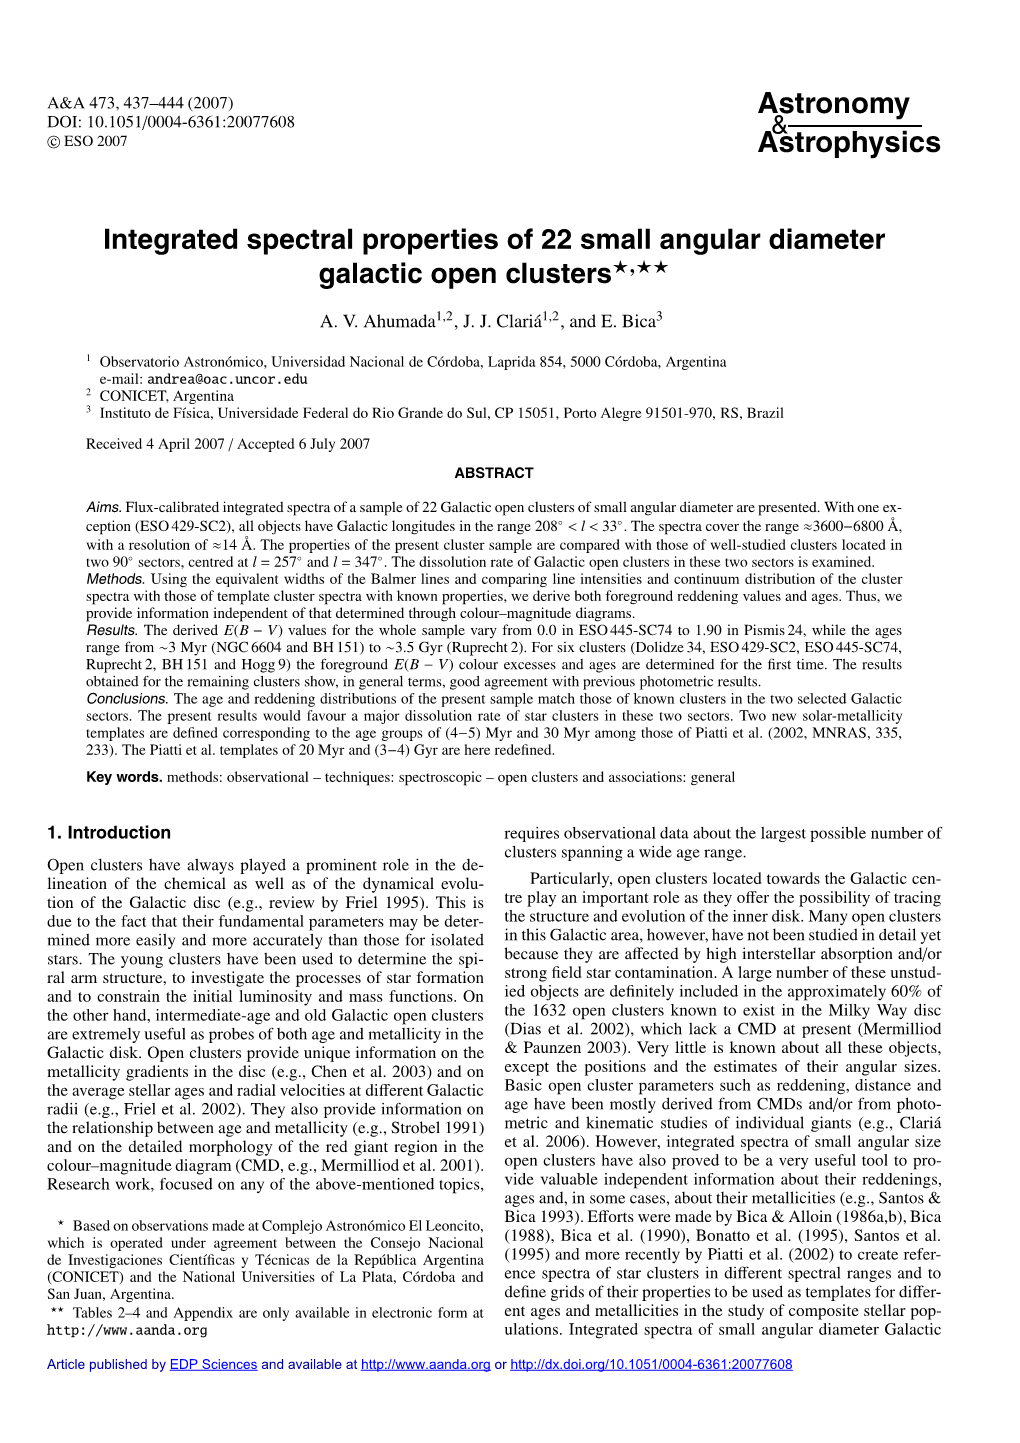 Integrated Spectral Properties of 22 Small Angular Diameter Galactic Open Clusters�,